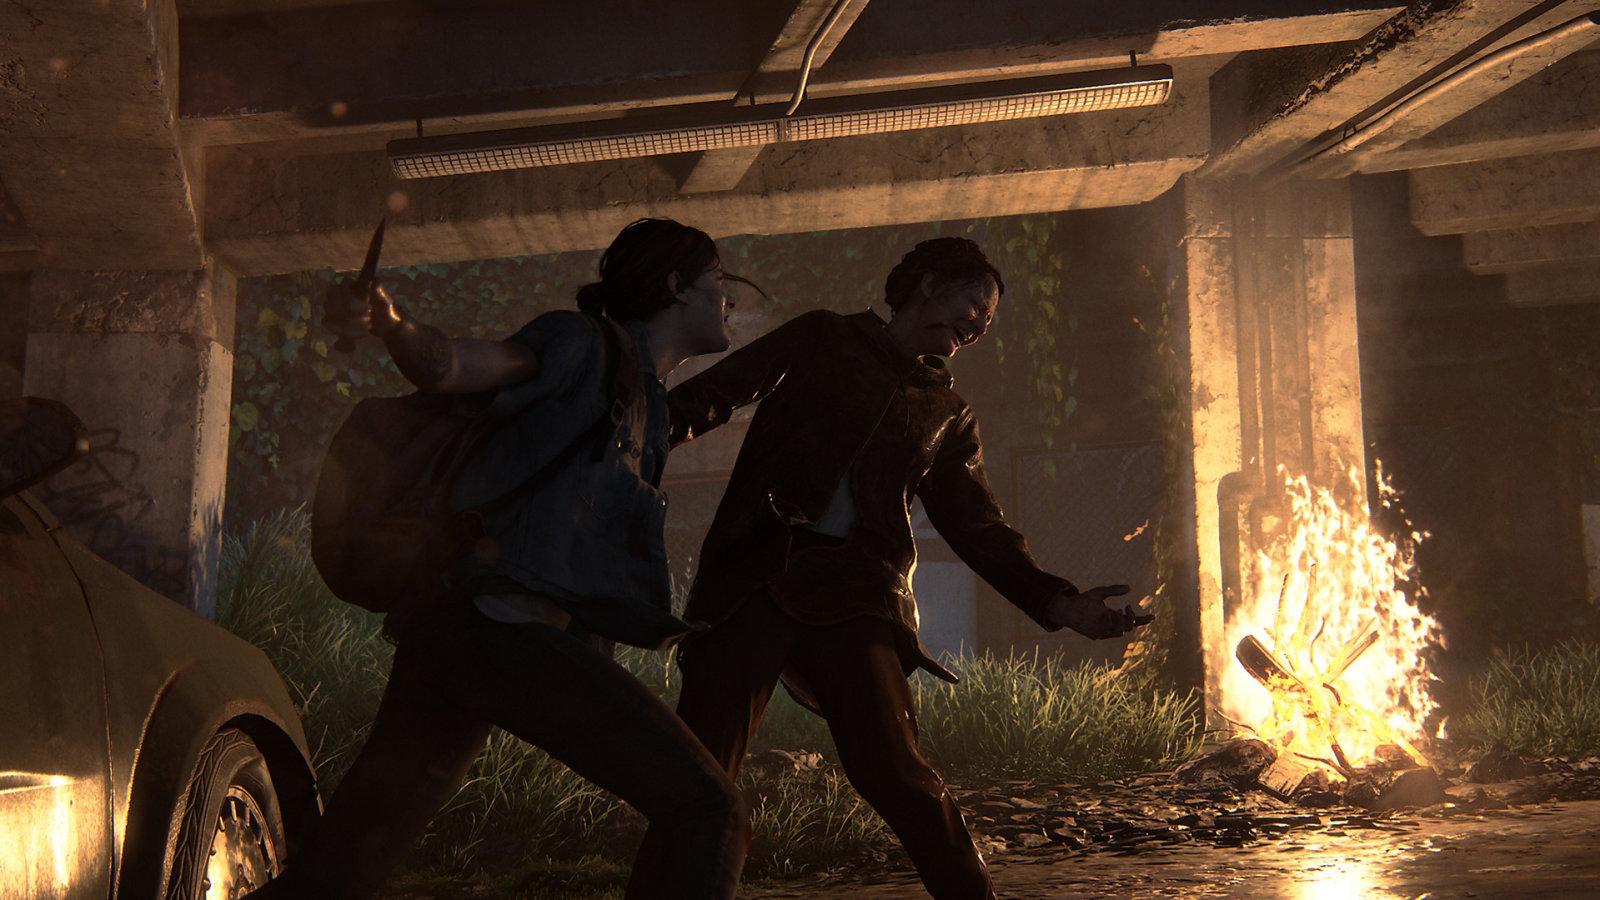 The Last of Us Part II' lands on February 21st, 2020